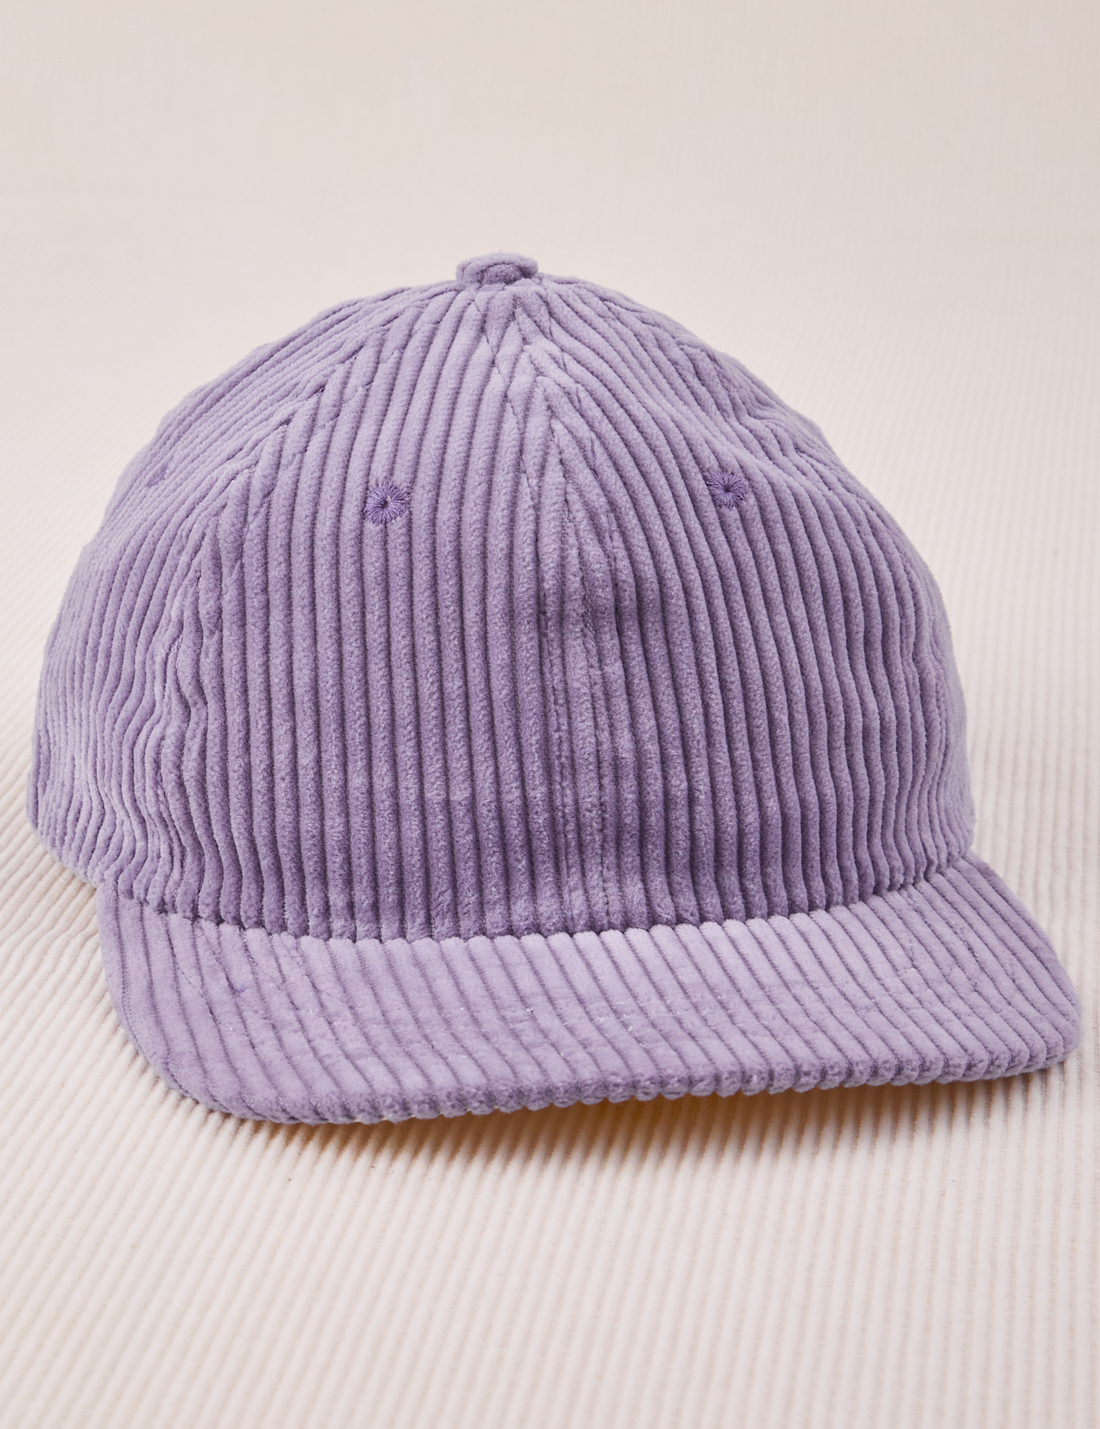 Dugout Corduroy Hat in Faded Grape